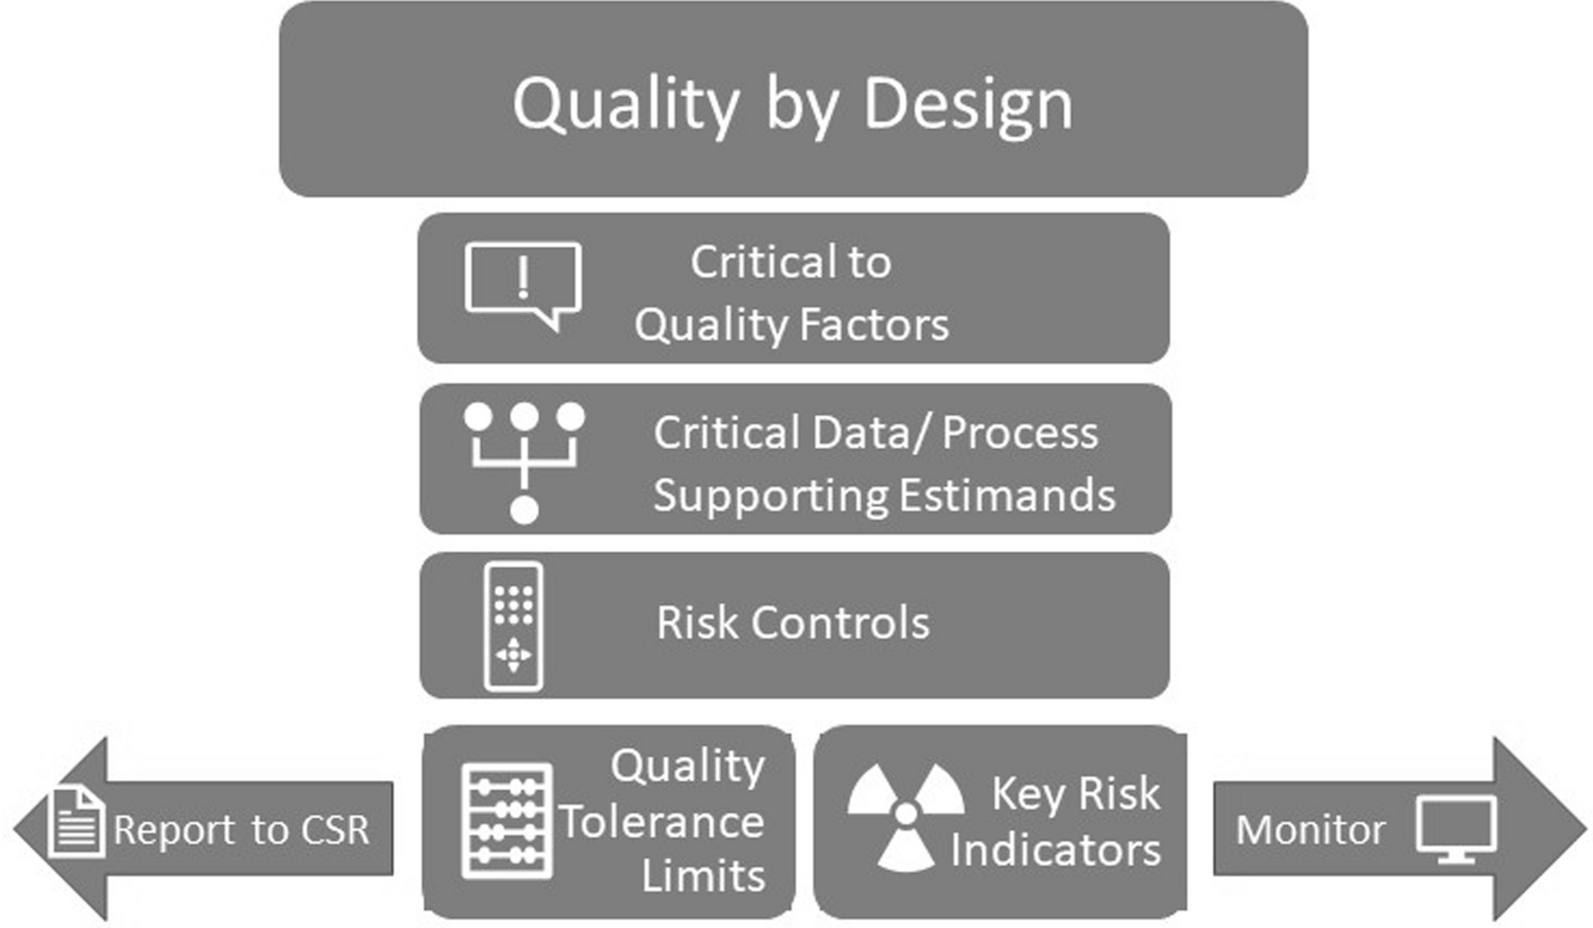 An Overview of Current Statistical Methods for Implementing Quality Tolerance Limits